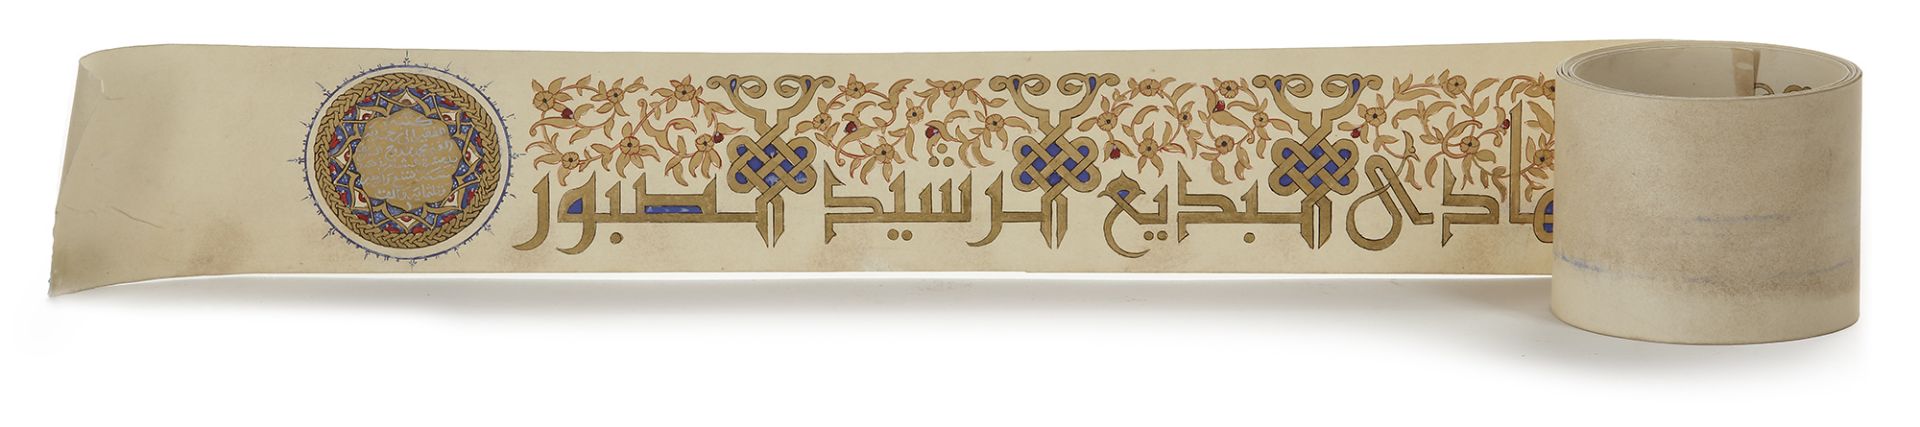 A CALLIGRAPHIC SCROLL OF THE NINETY-NINE NAMES OF ALLAH, DAMASCUS, DATED 1349 AH/1930 AD - Bild 5 aus 6